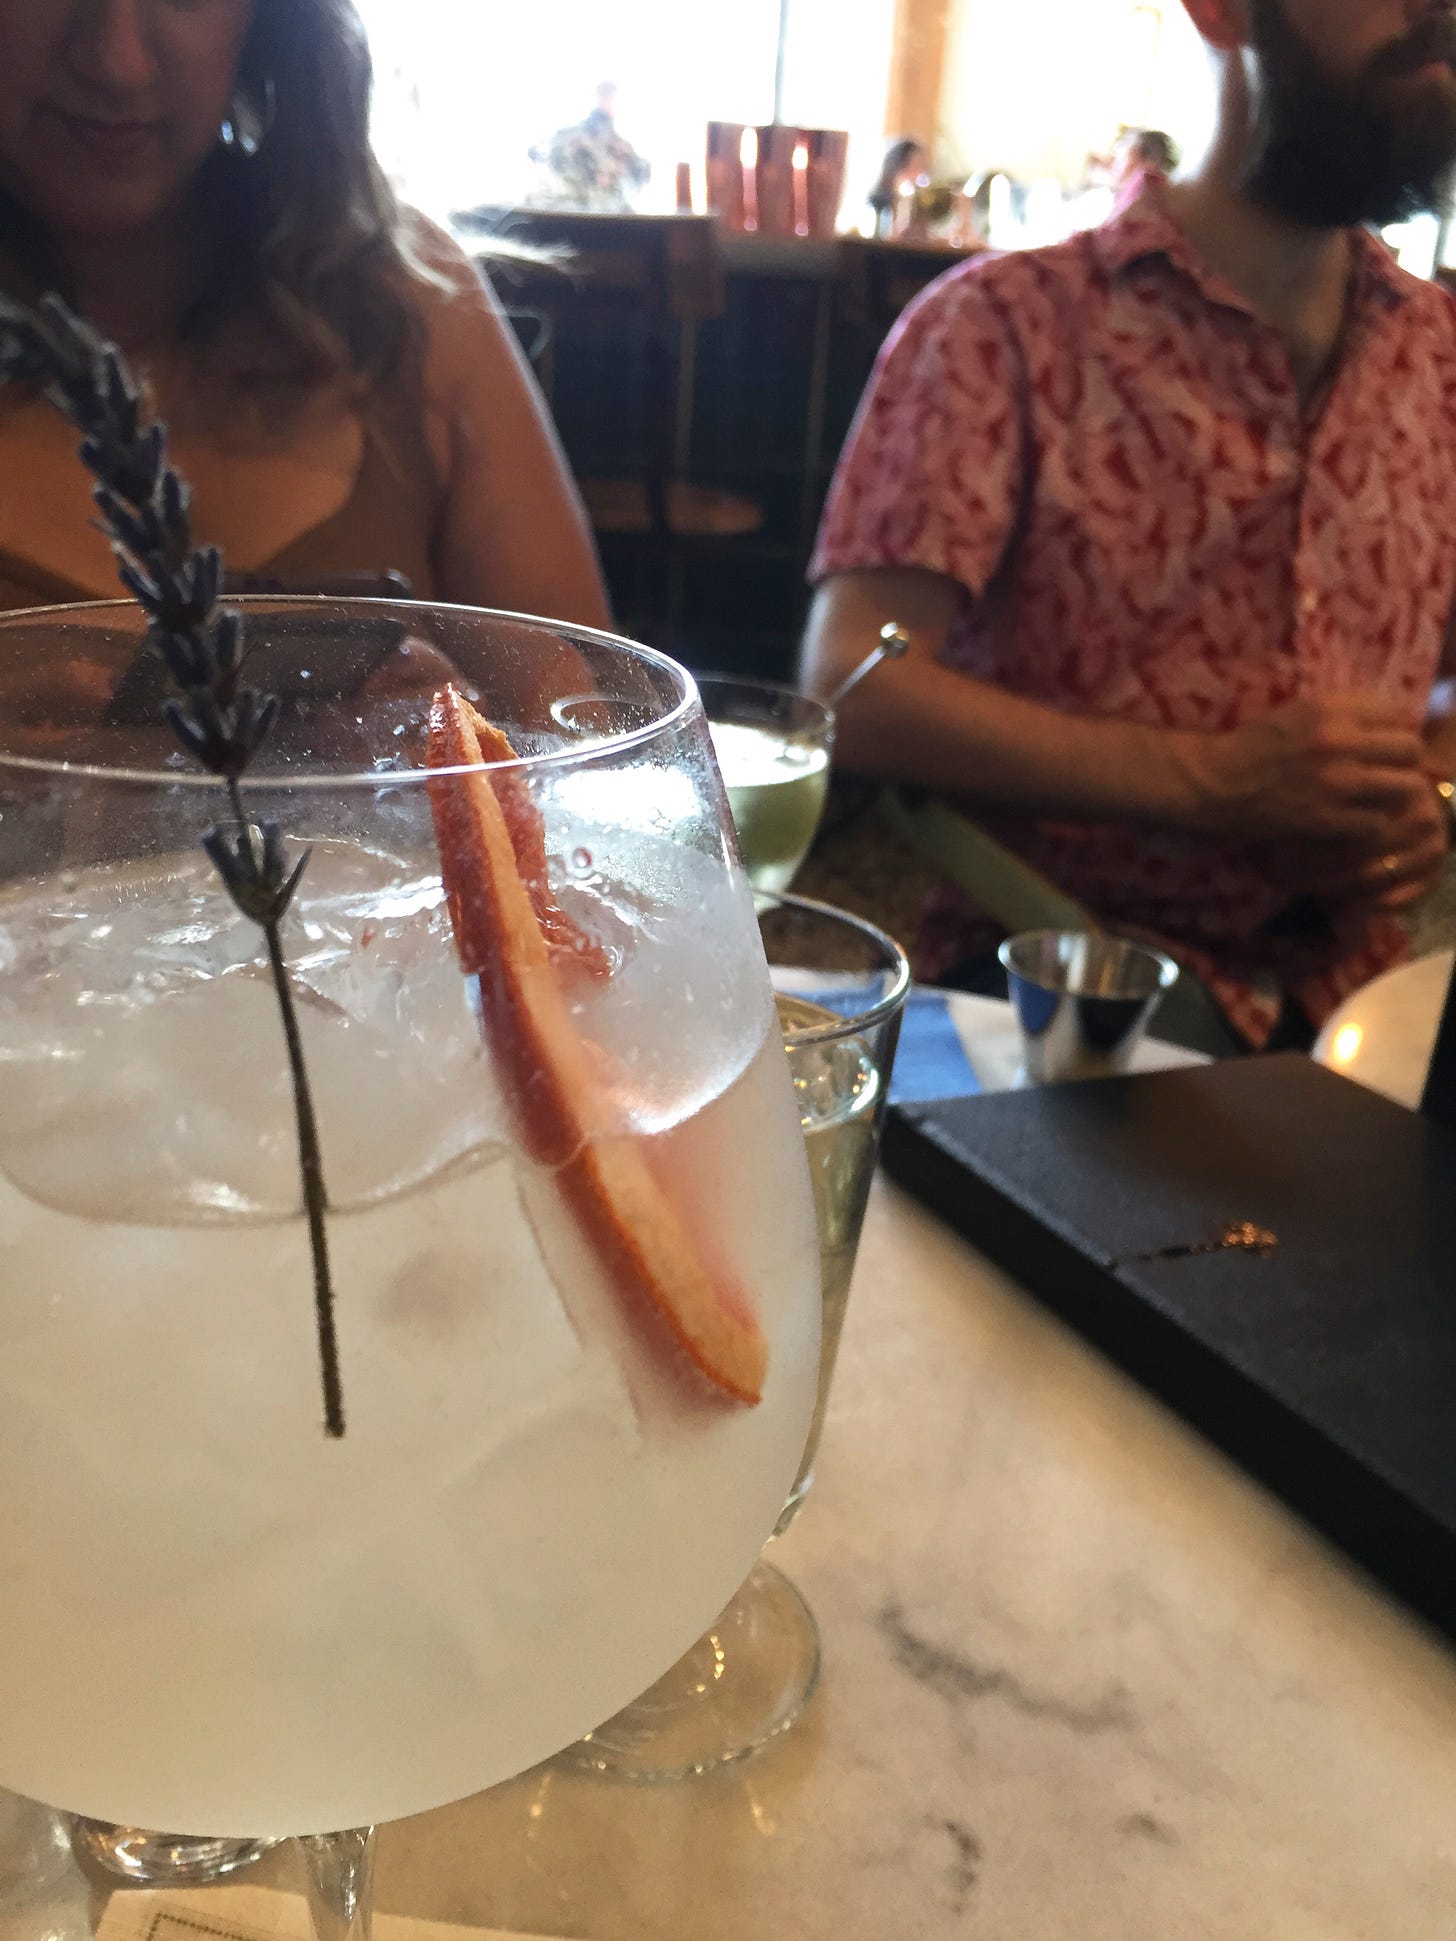 A close up view of a wine glass with a pale cocktail garnished with a sprig of lavender and a slice of dried grapefruit. In the background across the table are two people each with cocktails of their own.